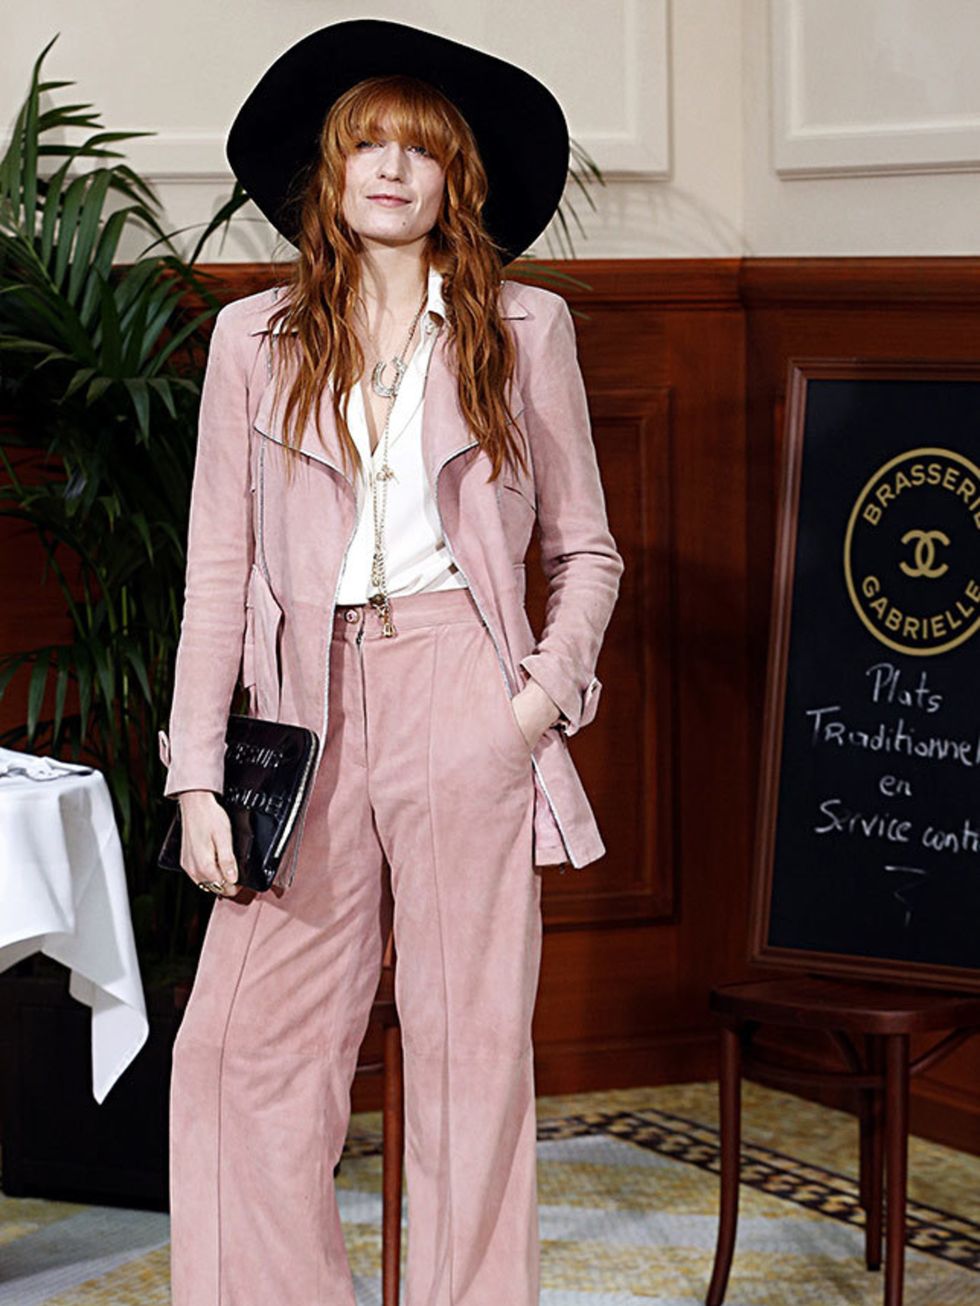 <p>Florence Welch in Chanel at the Chanel a/w 2015 show, February 2015.</p>